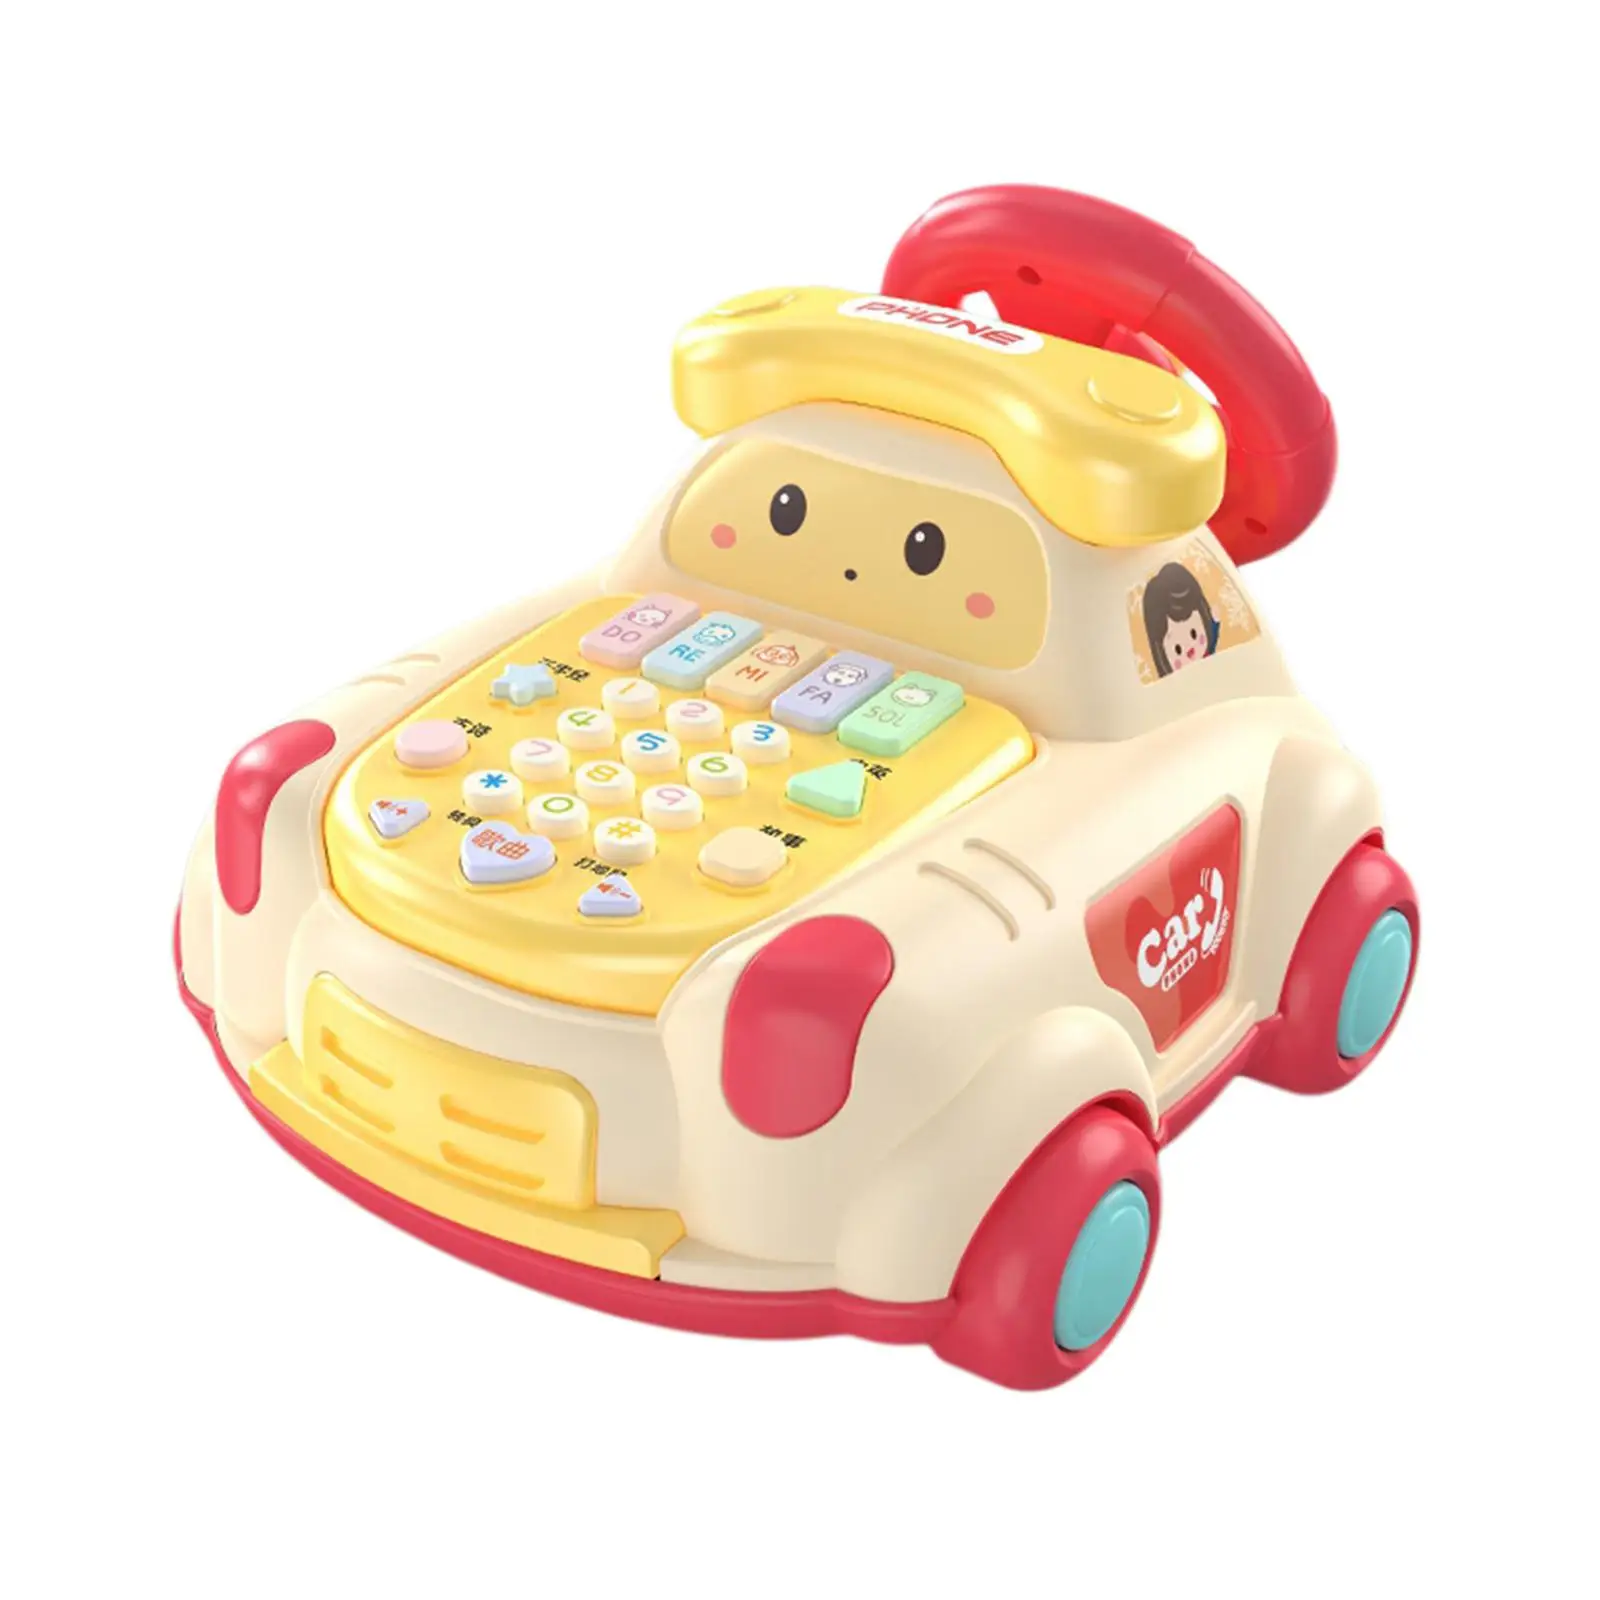 Children Phone Toy Hand Eye Coordination Educational Baby Musical Toys Car for Game Interaction Education Activity Learning